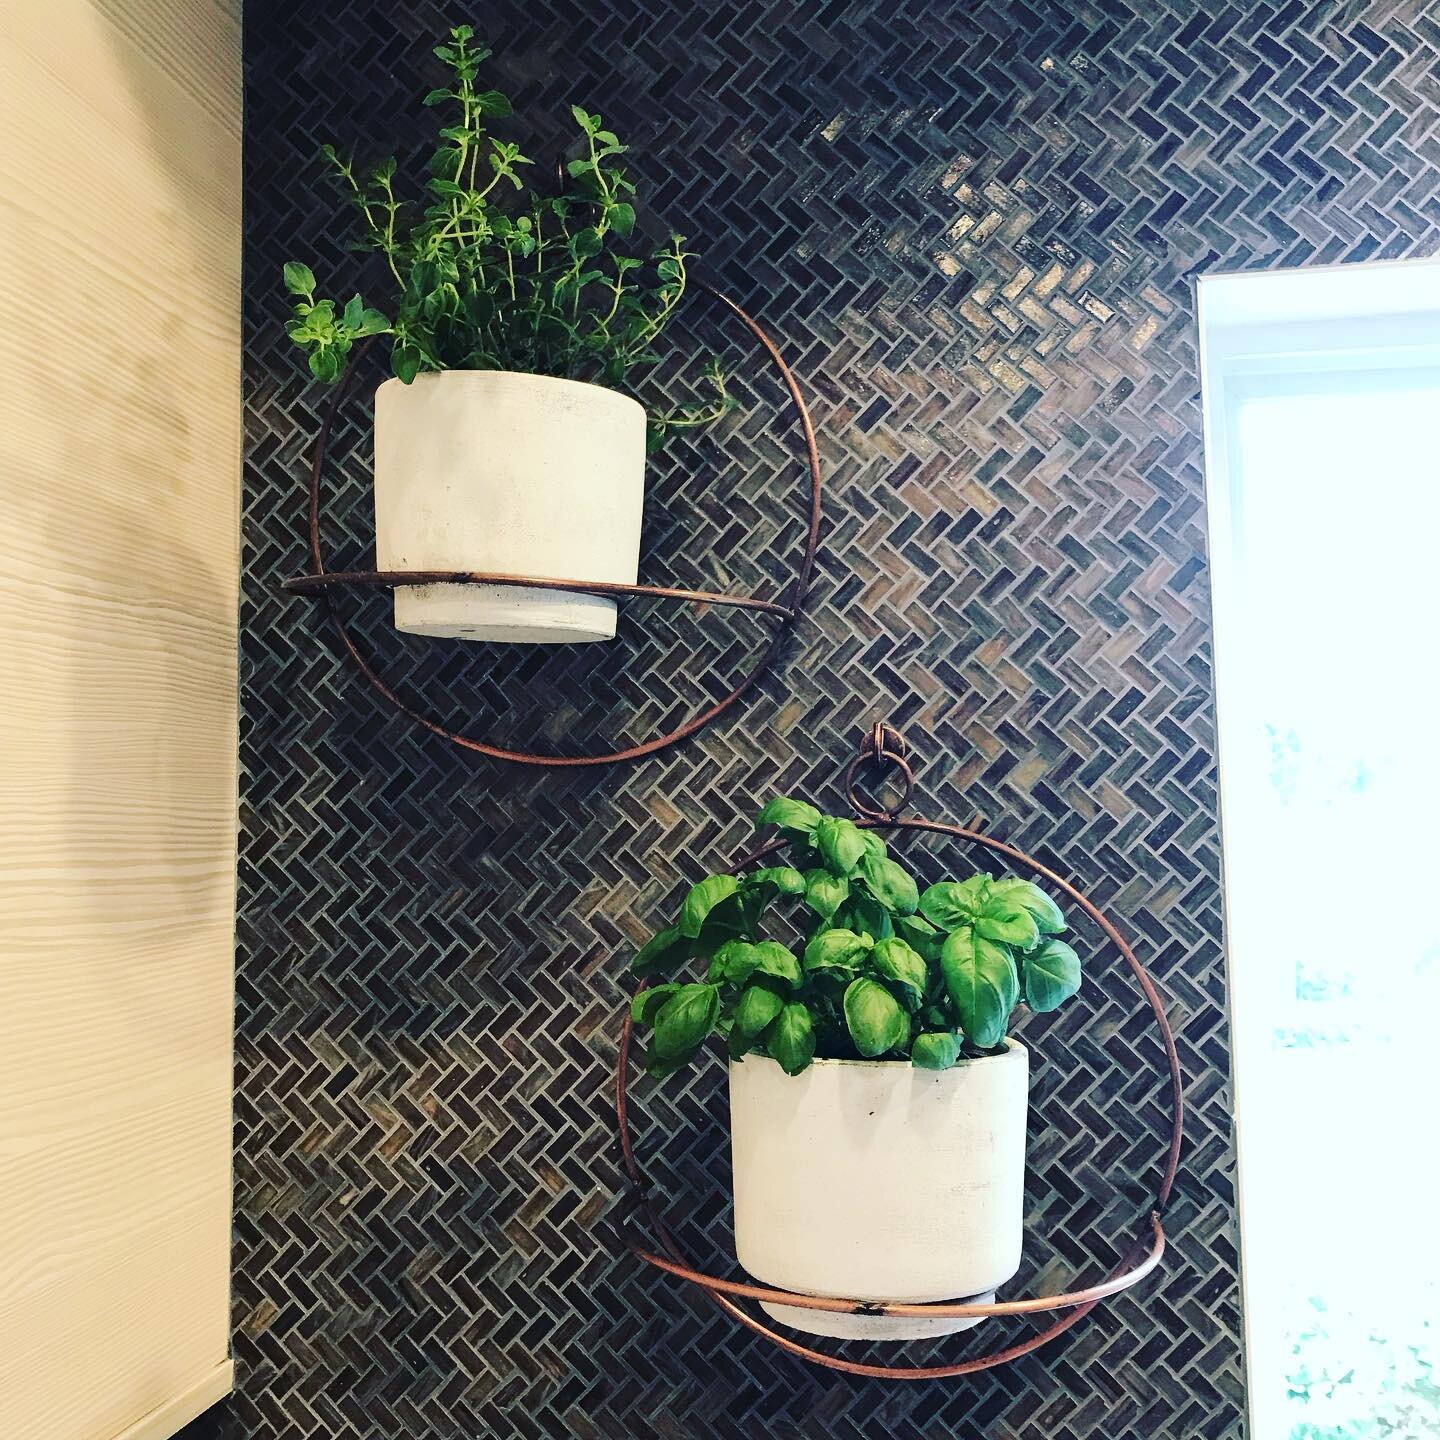 Fresh herbs displayed cleverly by the kitchen window tops off this recent kitchen remodel for our happy client😍
.
.
.
.

design:@TopkatDesignGroup
#sodomino
#finditstyleit
#interiorinspo
#myhousebeautiful
#interiordesign
#topkatdesigngroup
#TDG
#lon